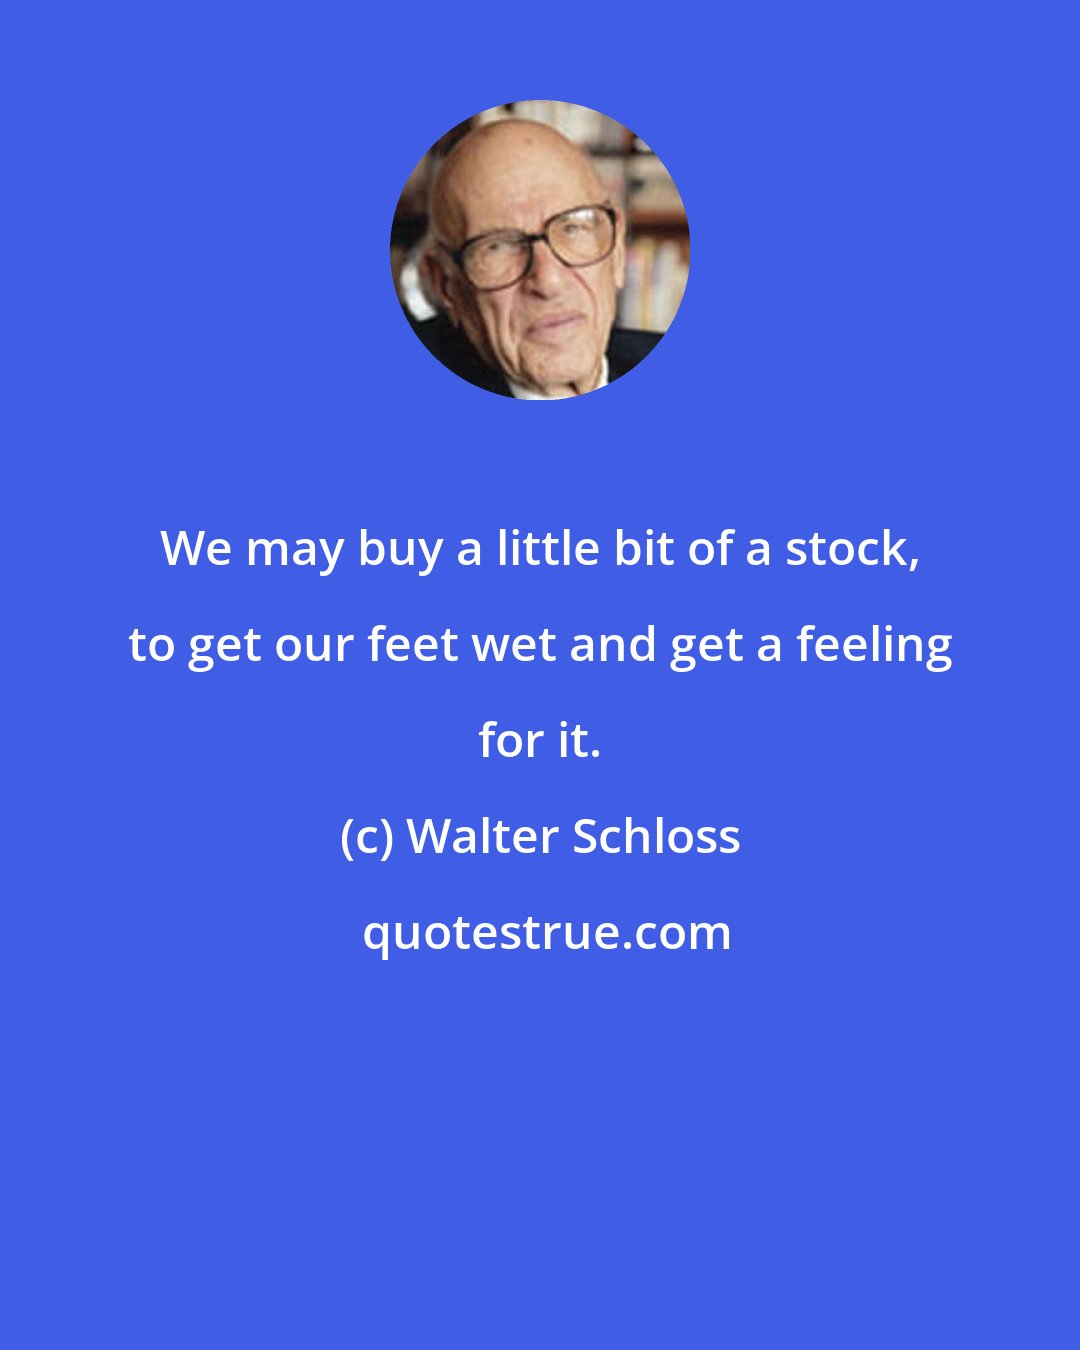 Walter Schloss: We may buy a little bit of a stock, to get our feet wet and get a feeling for it.